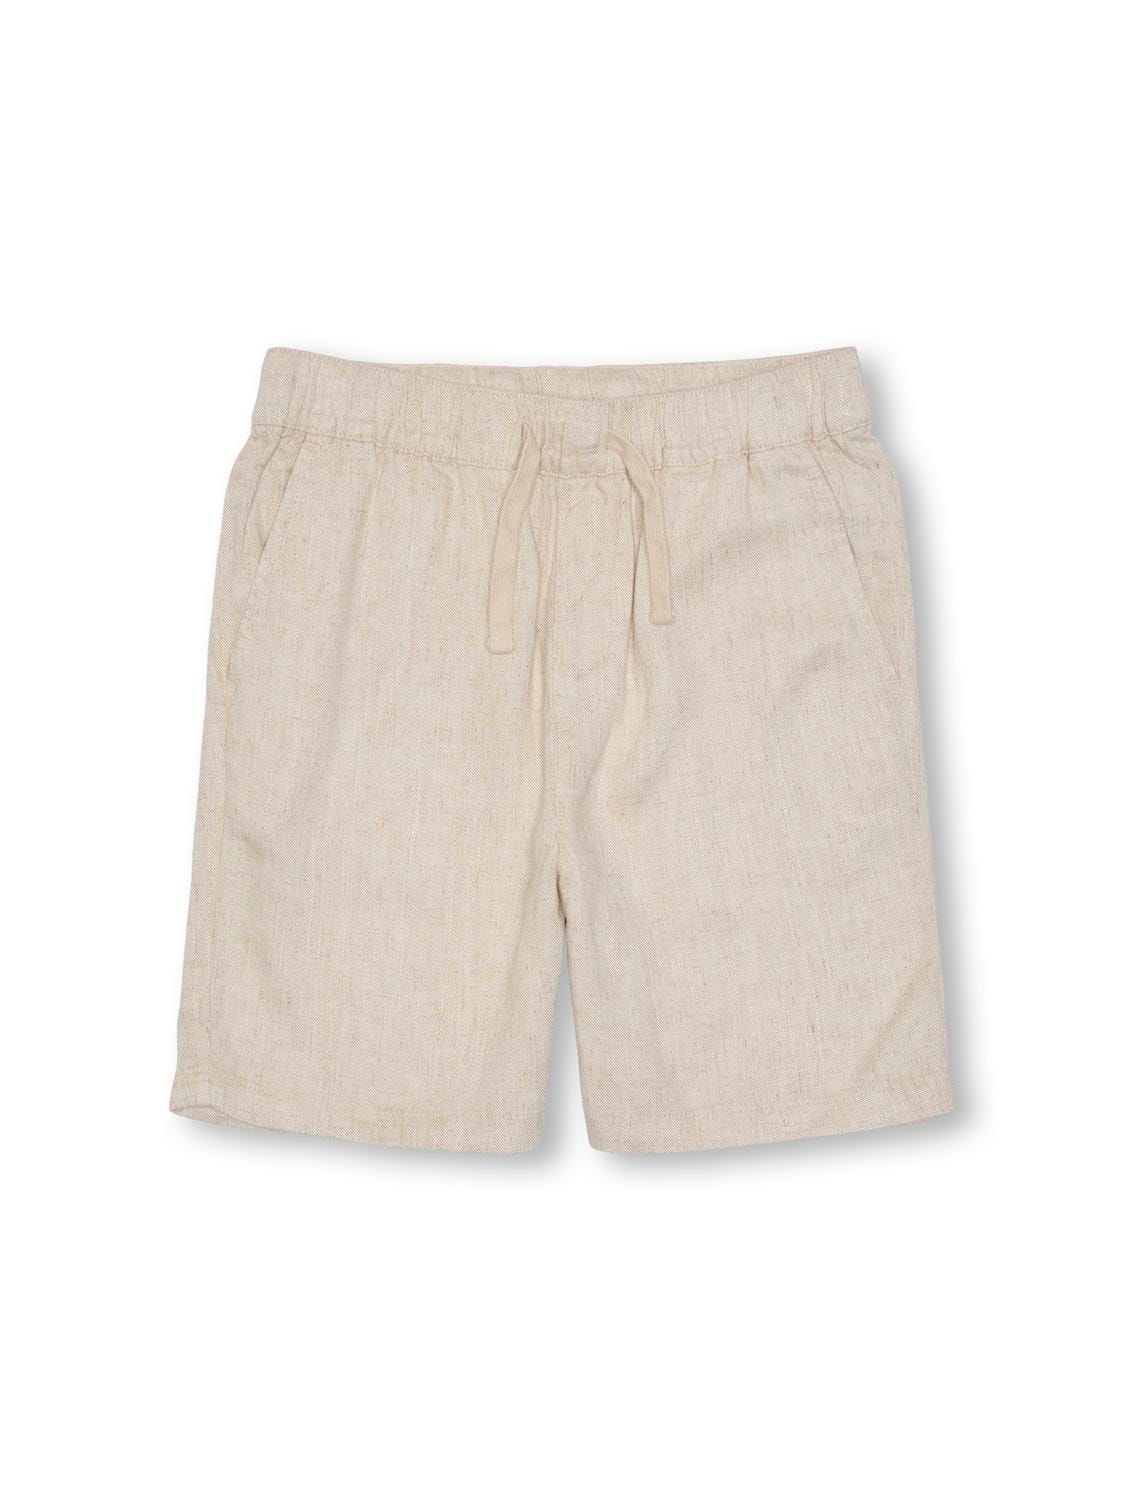 ONLY Normal passform Shorts -Oatmeal - 15327738